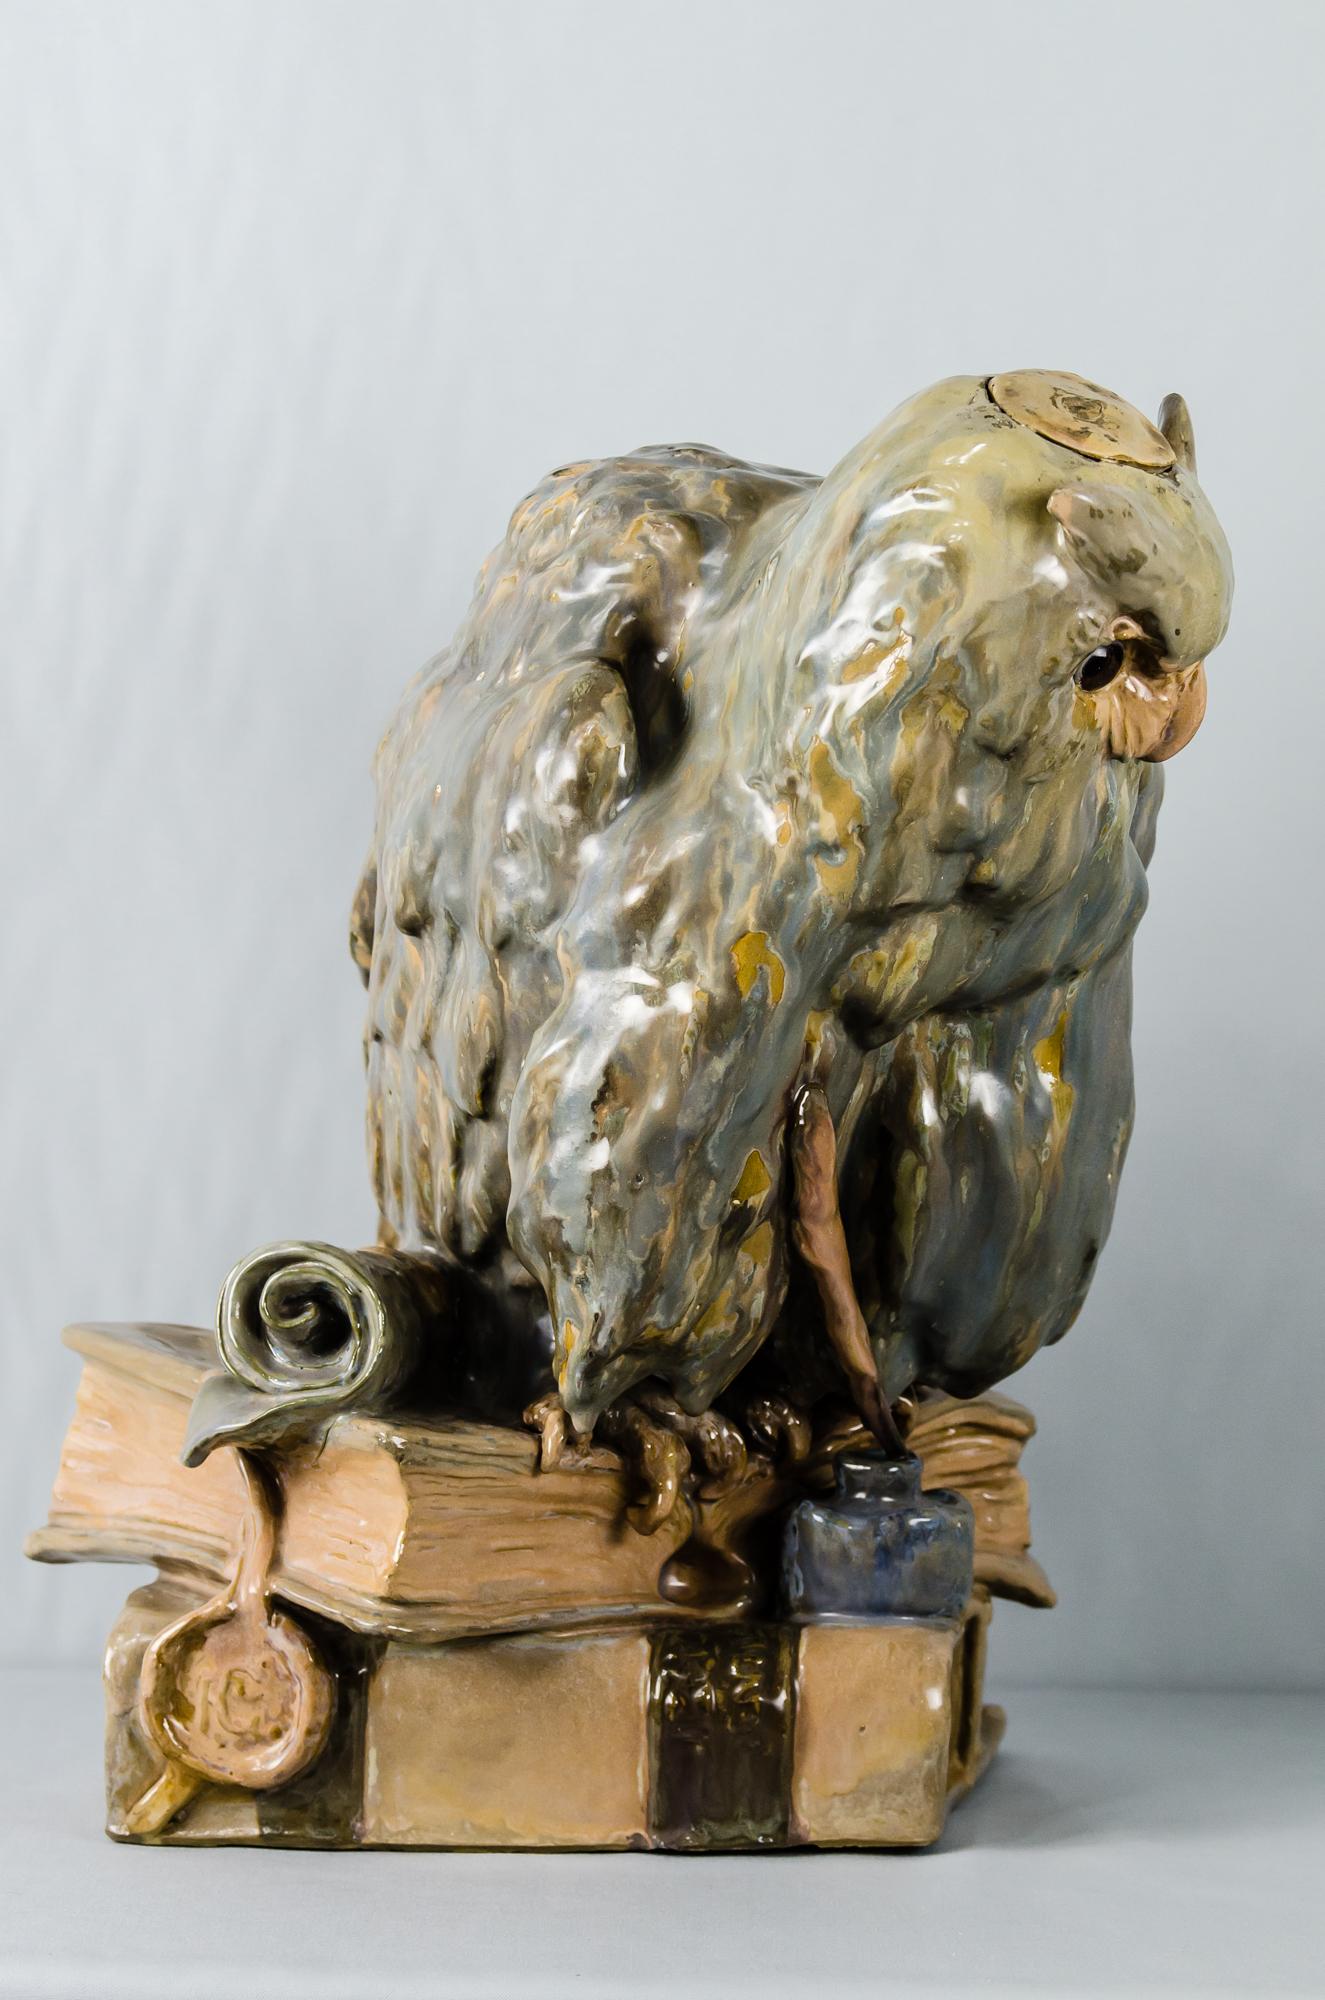 Big Ceramic Golscheider Owl Lamp 
Writing on the book shows Reproduction Reservee´
figurative reproductions in stone molding (artificial marble).
if there is a bulb inside, that makes the eyes shine.
Original condition.

  